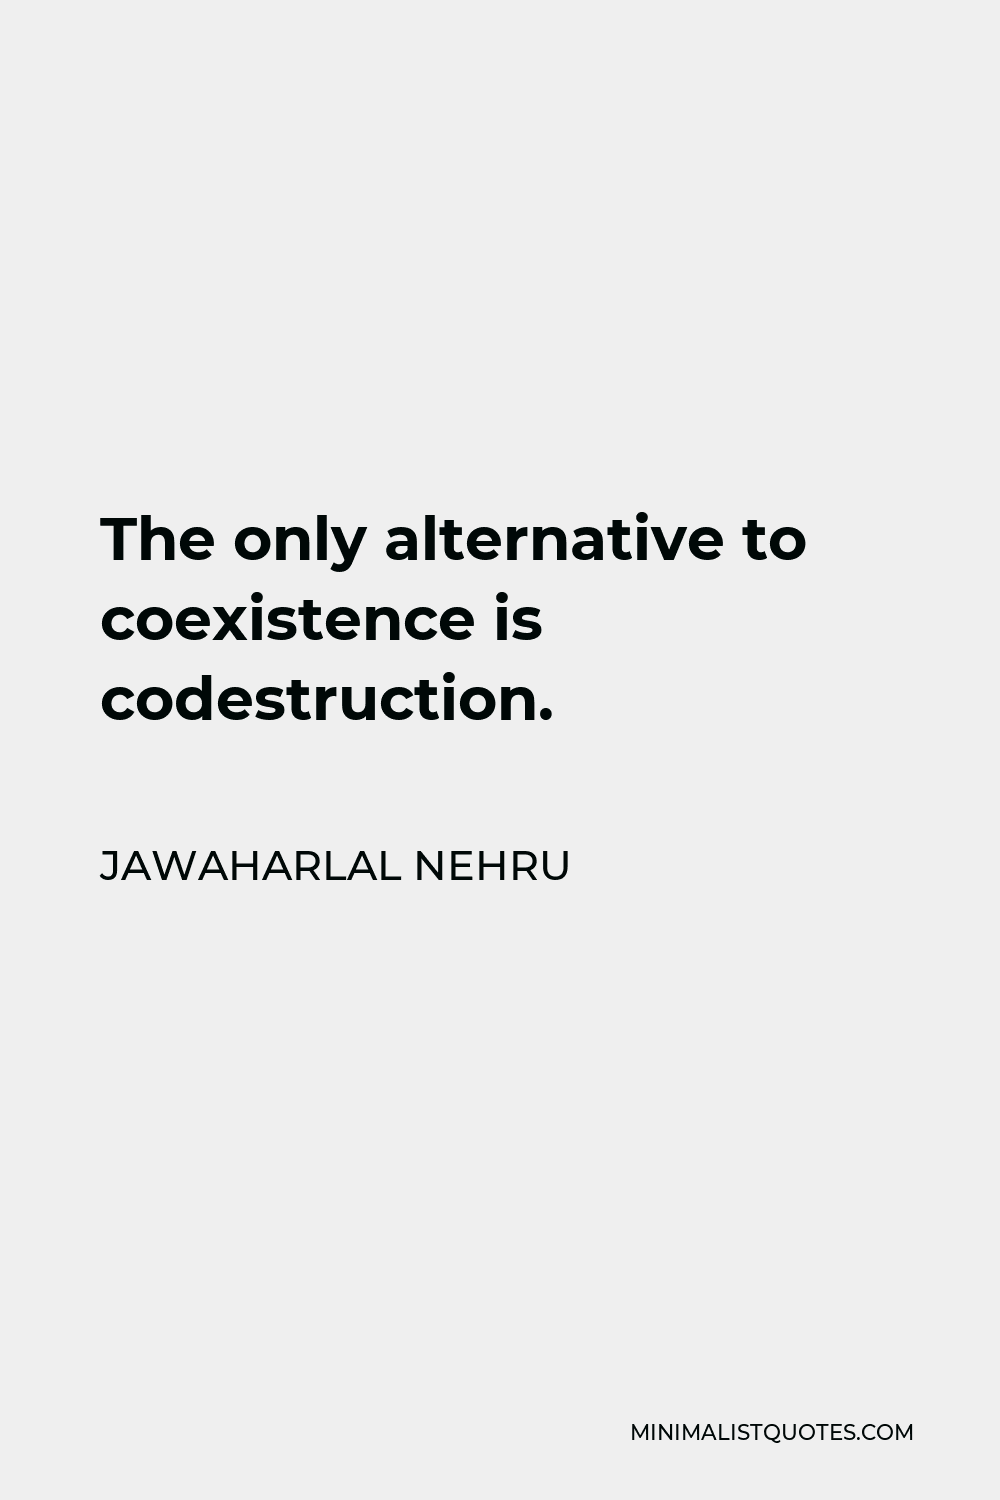 Jawaharlal Nehru Quote - The only alternative to coexistence is codestruction.